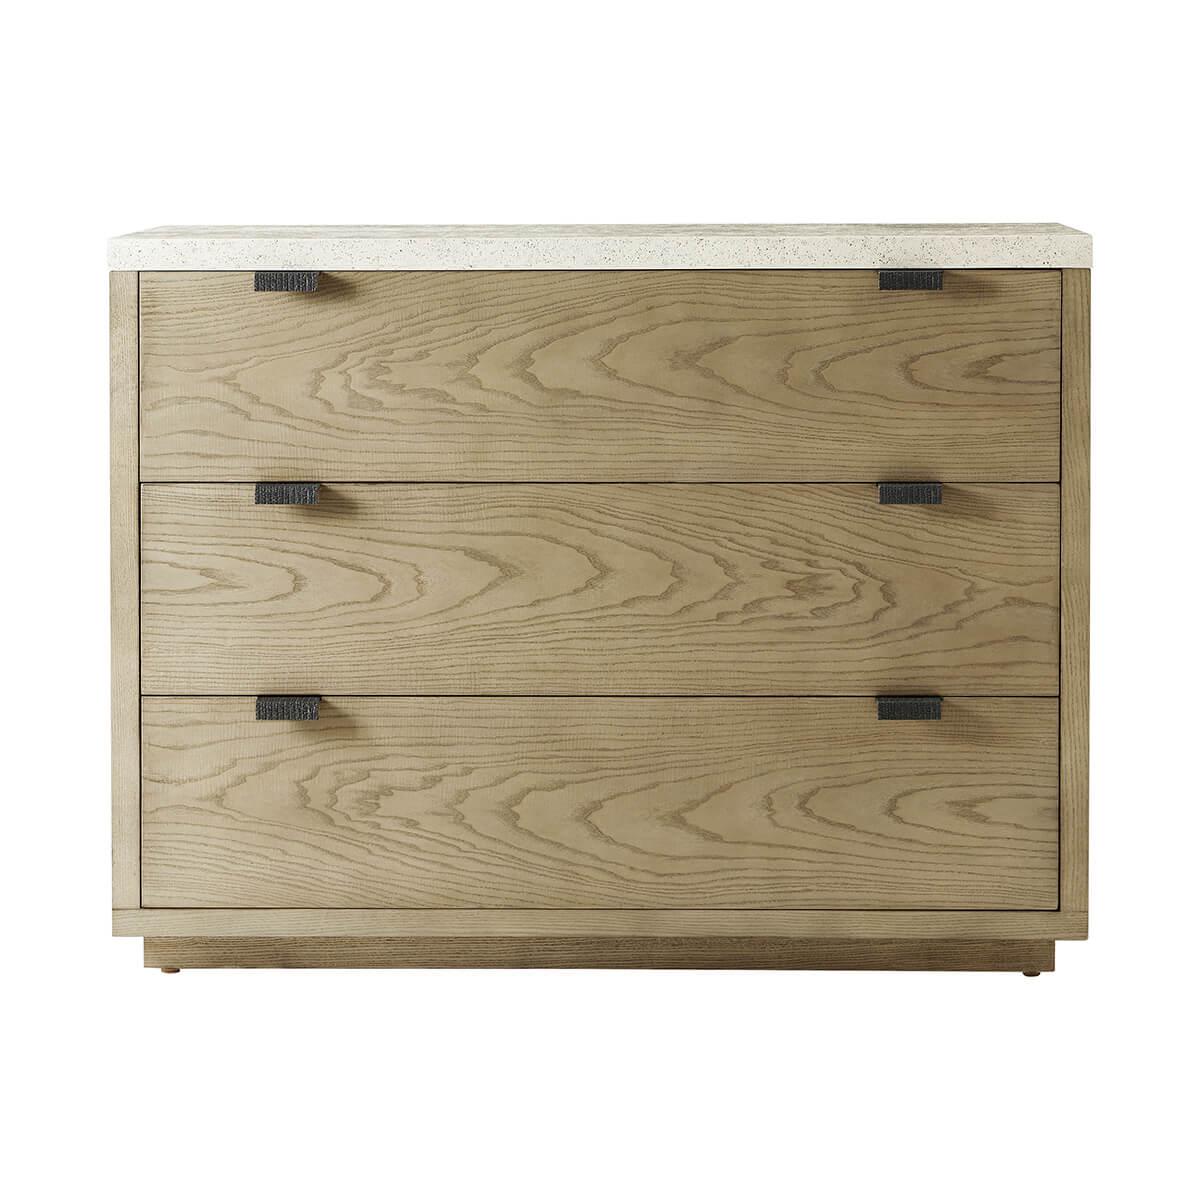 Made of figured cathedral ash in an artful grain pattern with soft close drawers. Finished in a light dune color with metal pulls in an Ember color. The top is done in an exclusive porous Mineral finish.

Dimensions: 50